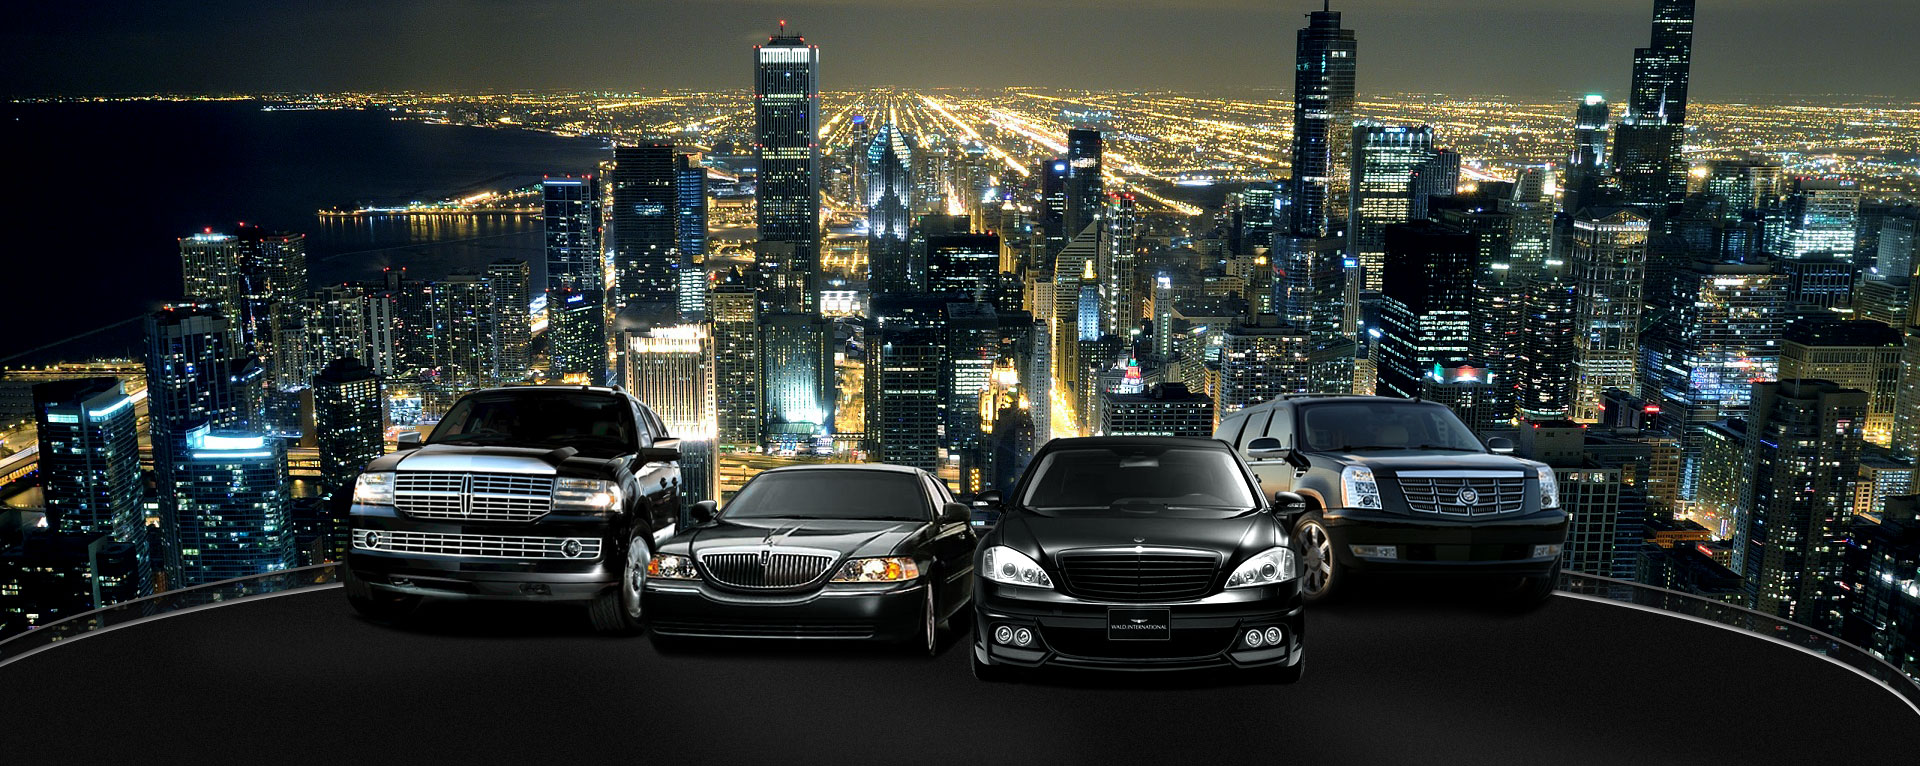 best airport limo service in toronto